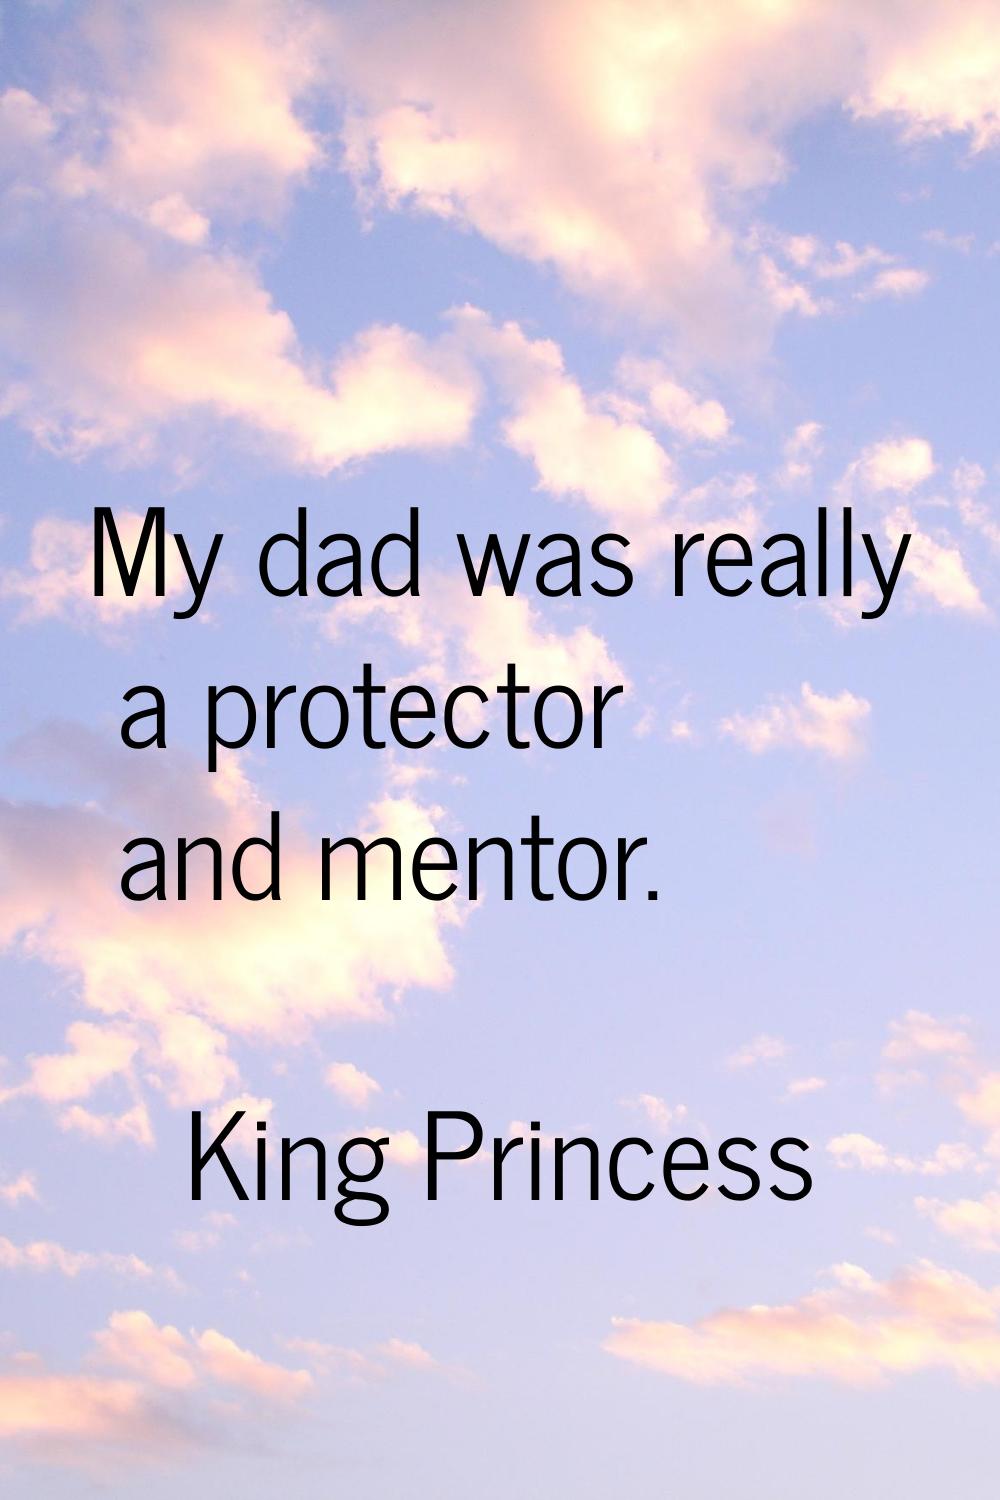 My dad was really a protector and mentor.